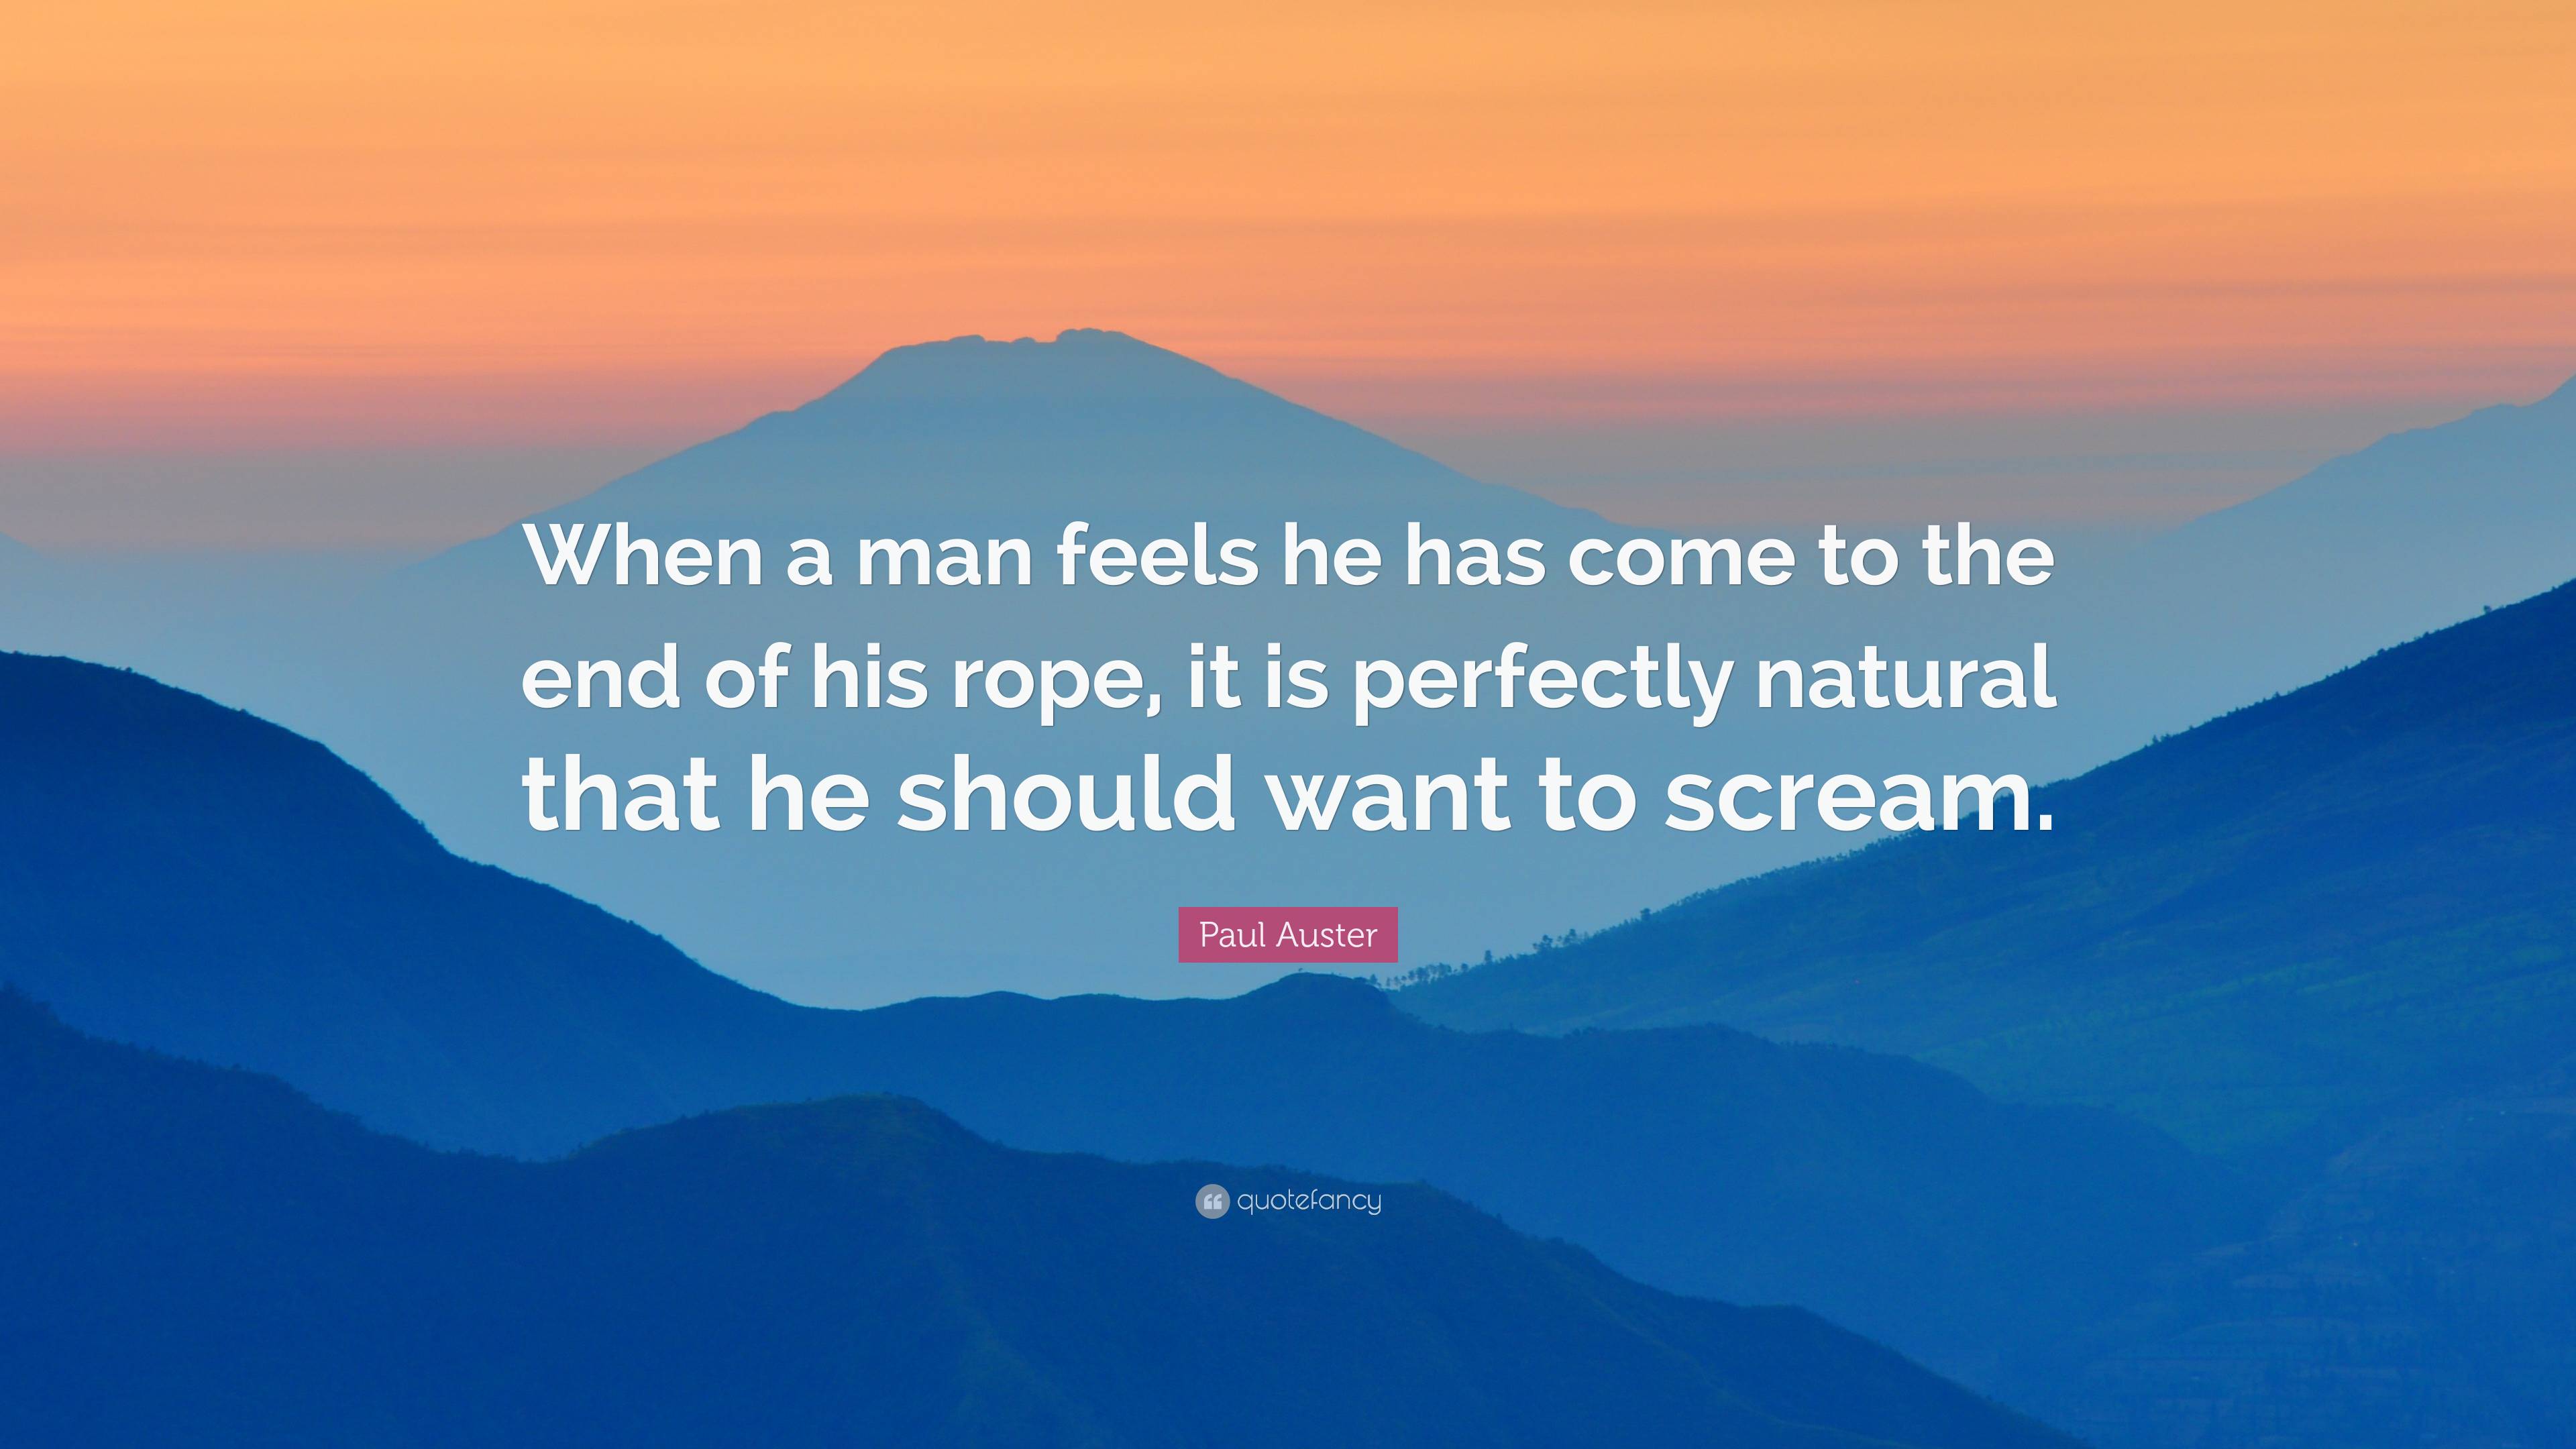 Paul Auster Quote: “When a man feels he has come to the end of his rope ...